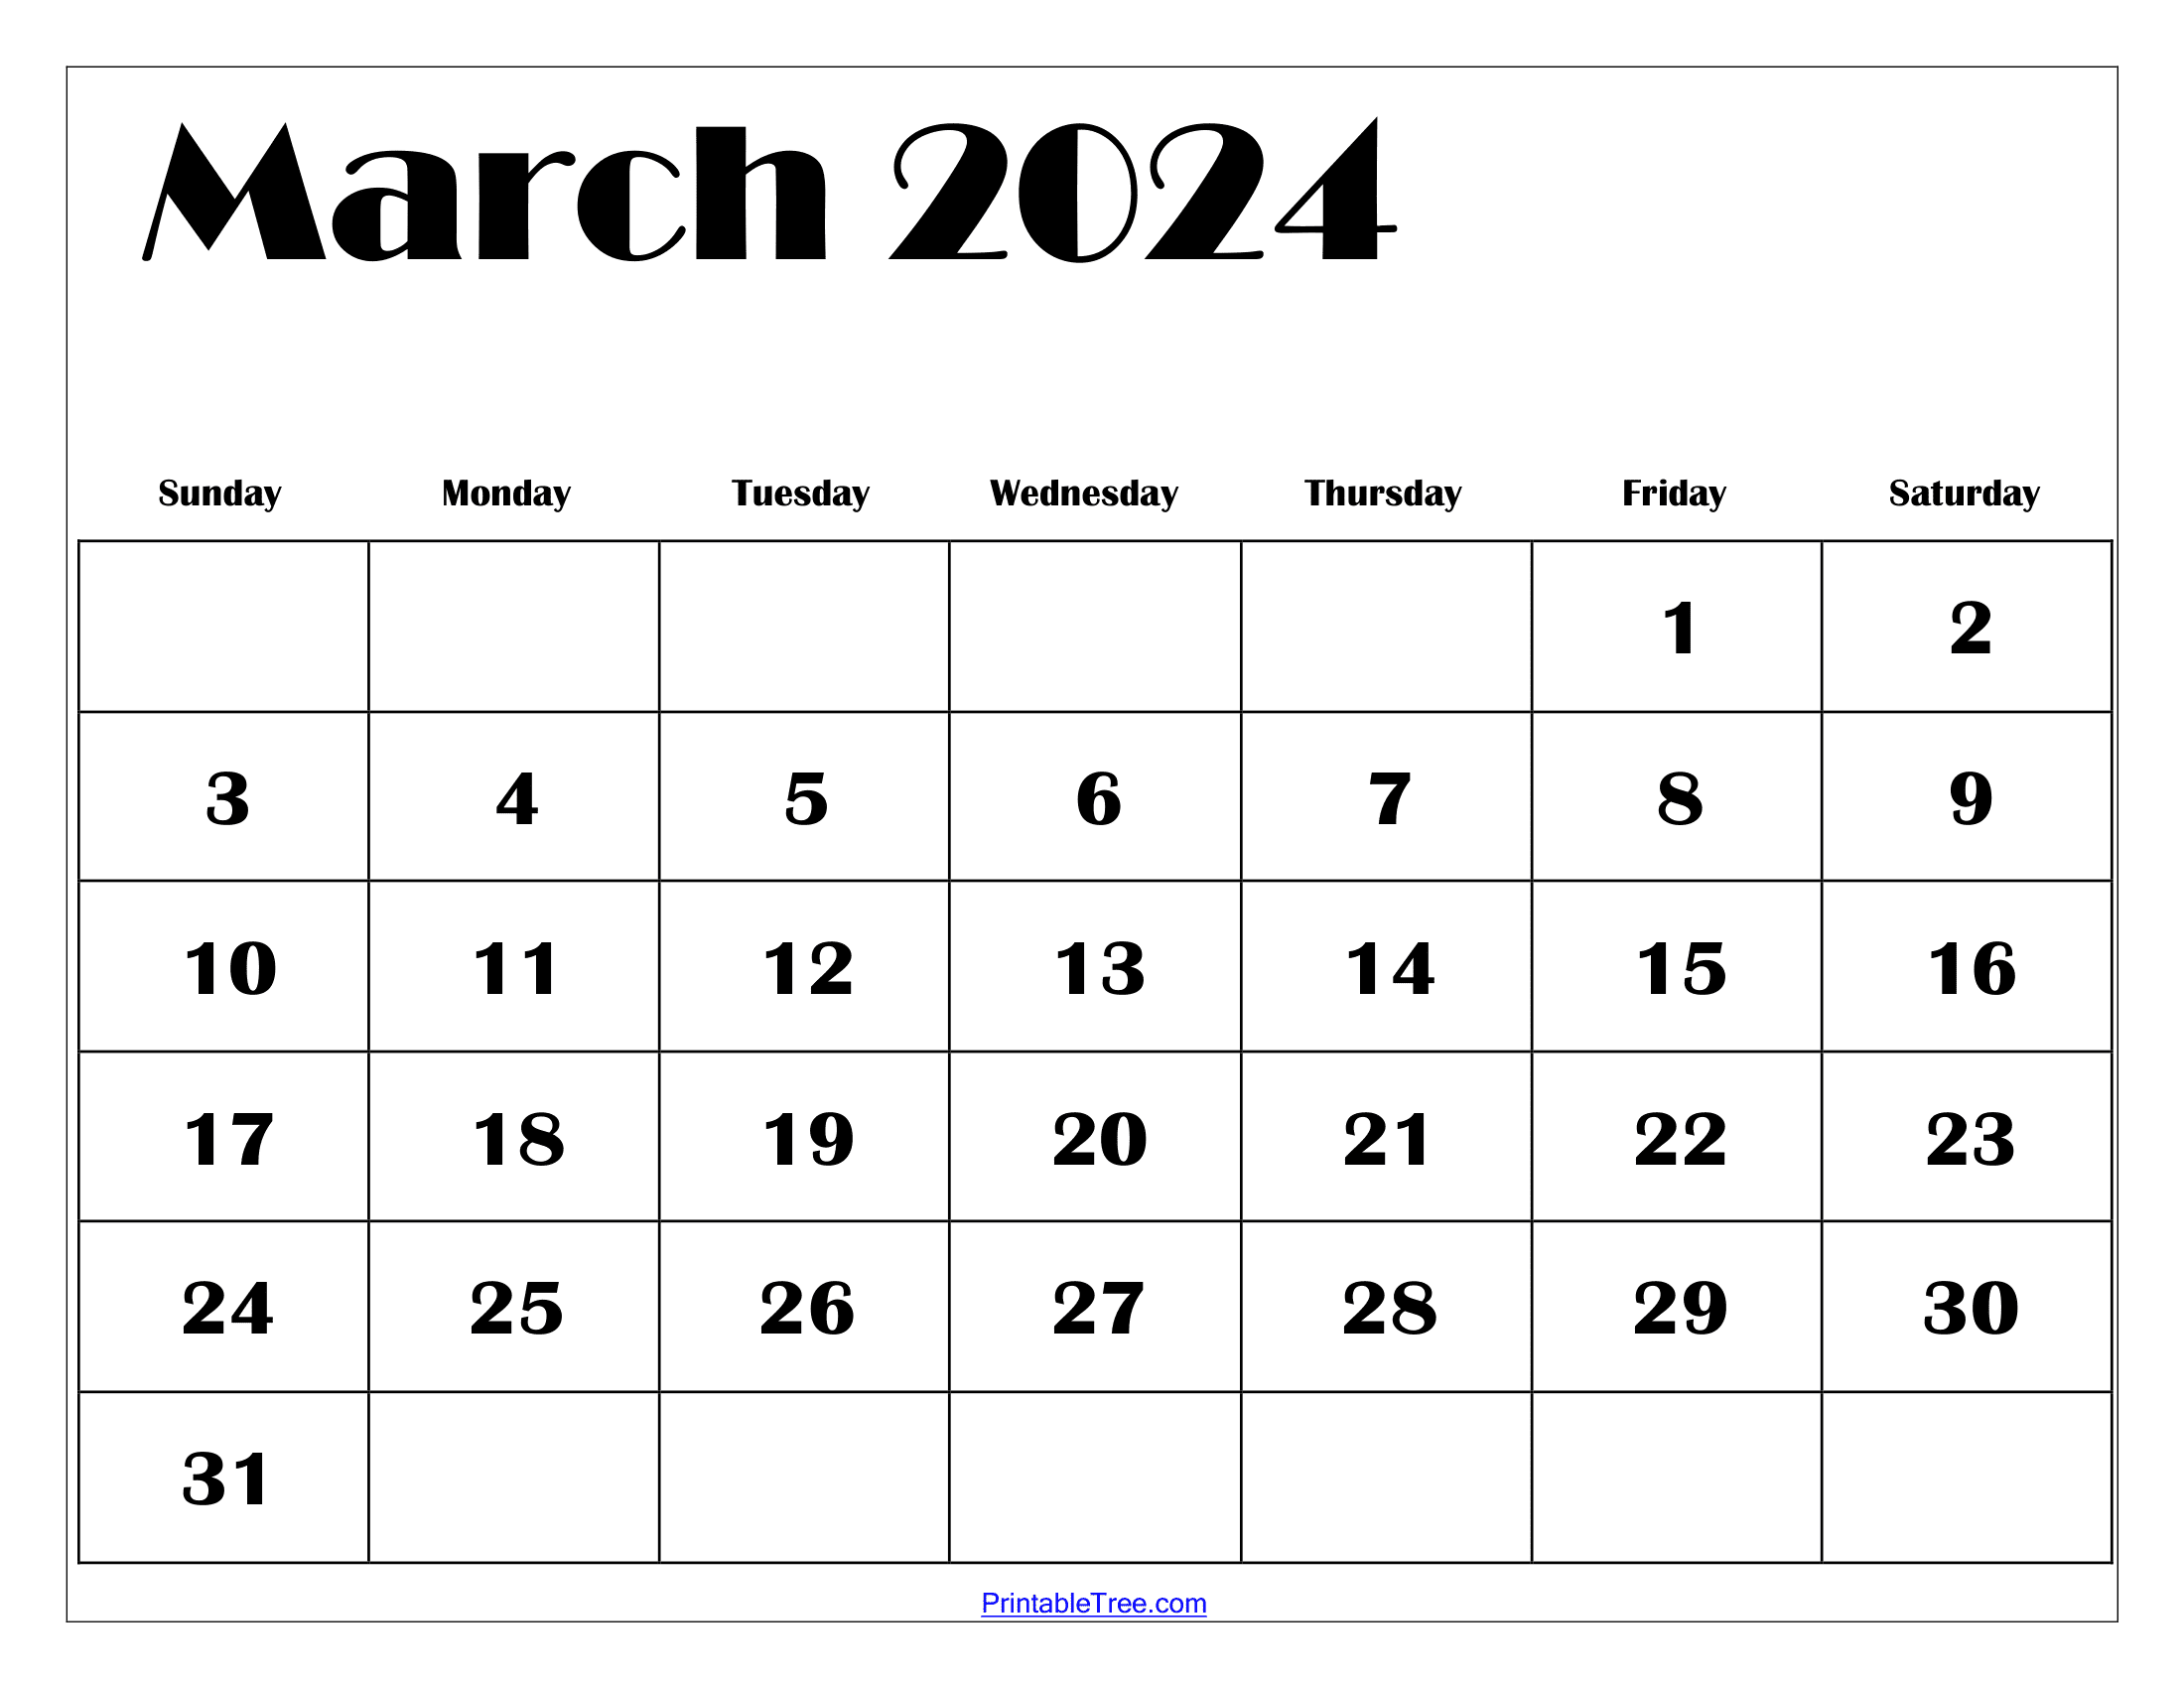 March 2024 Calendar Printable Pdf With Holidays Template Free for Calendar Printable March 2024